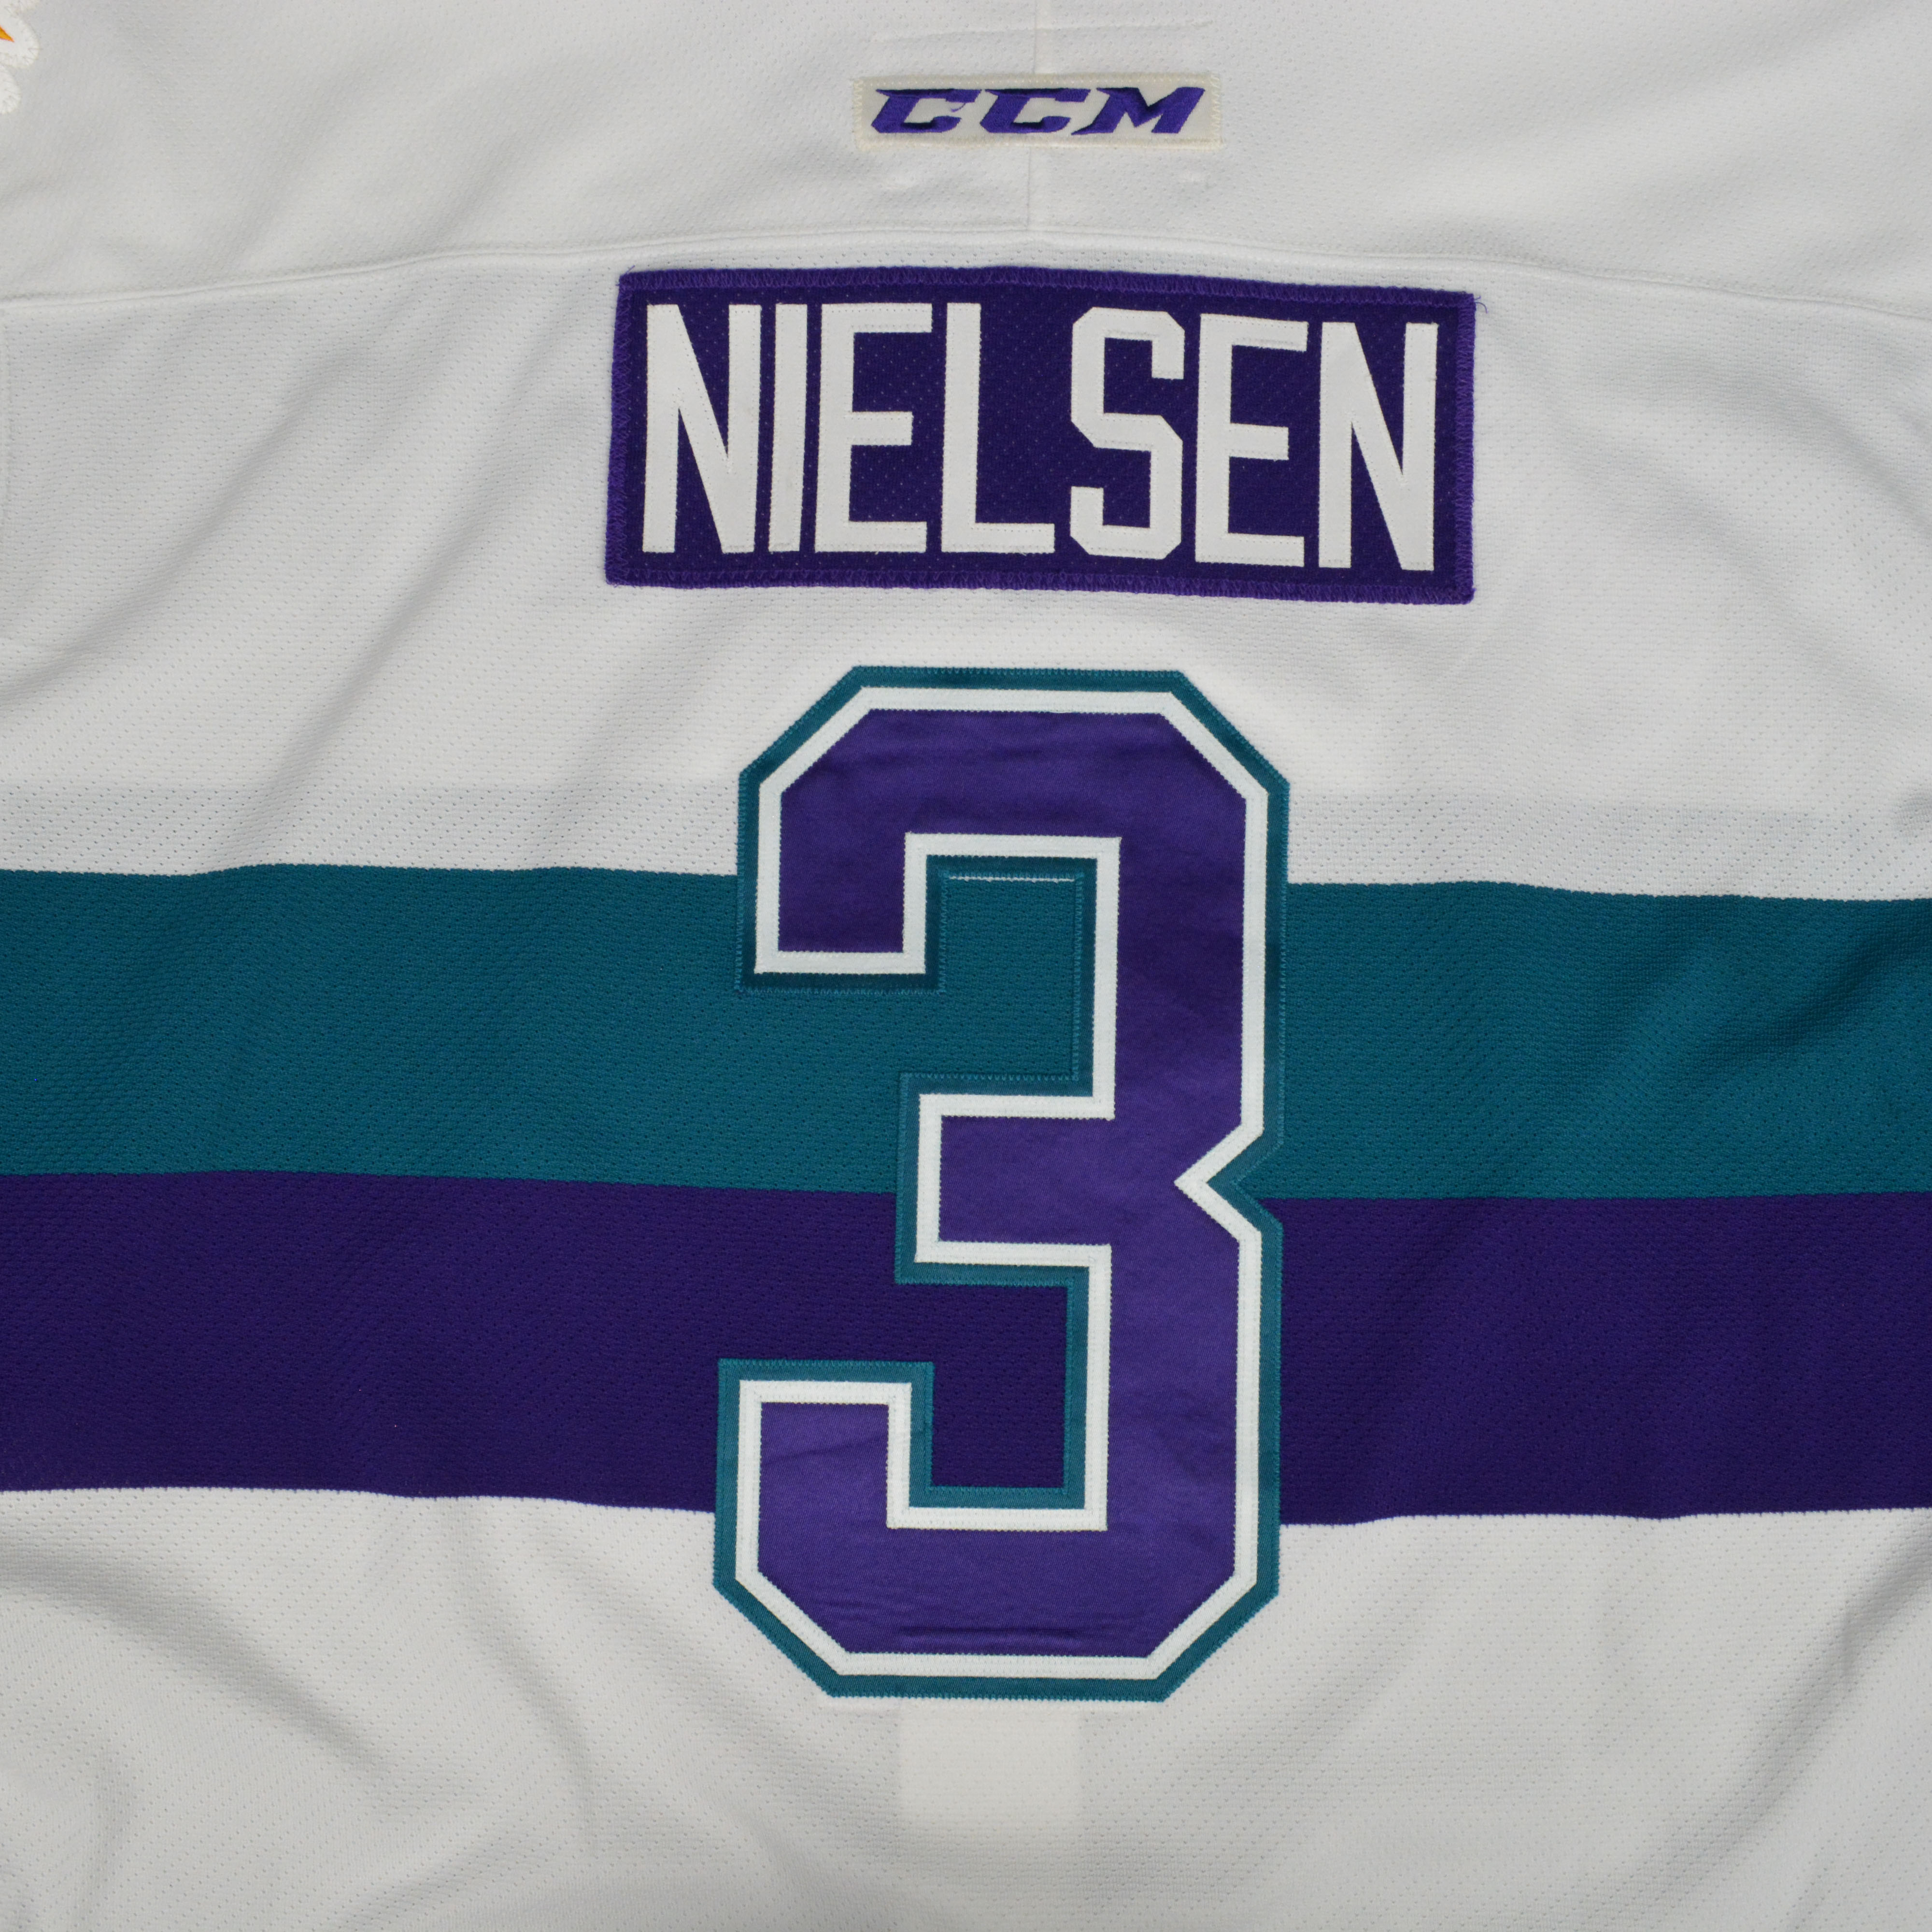 Solar Bears to auction jerseys to benefit ECHL players beginning May 6